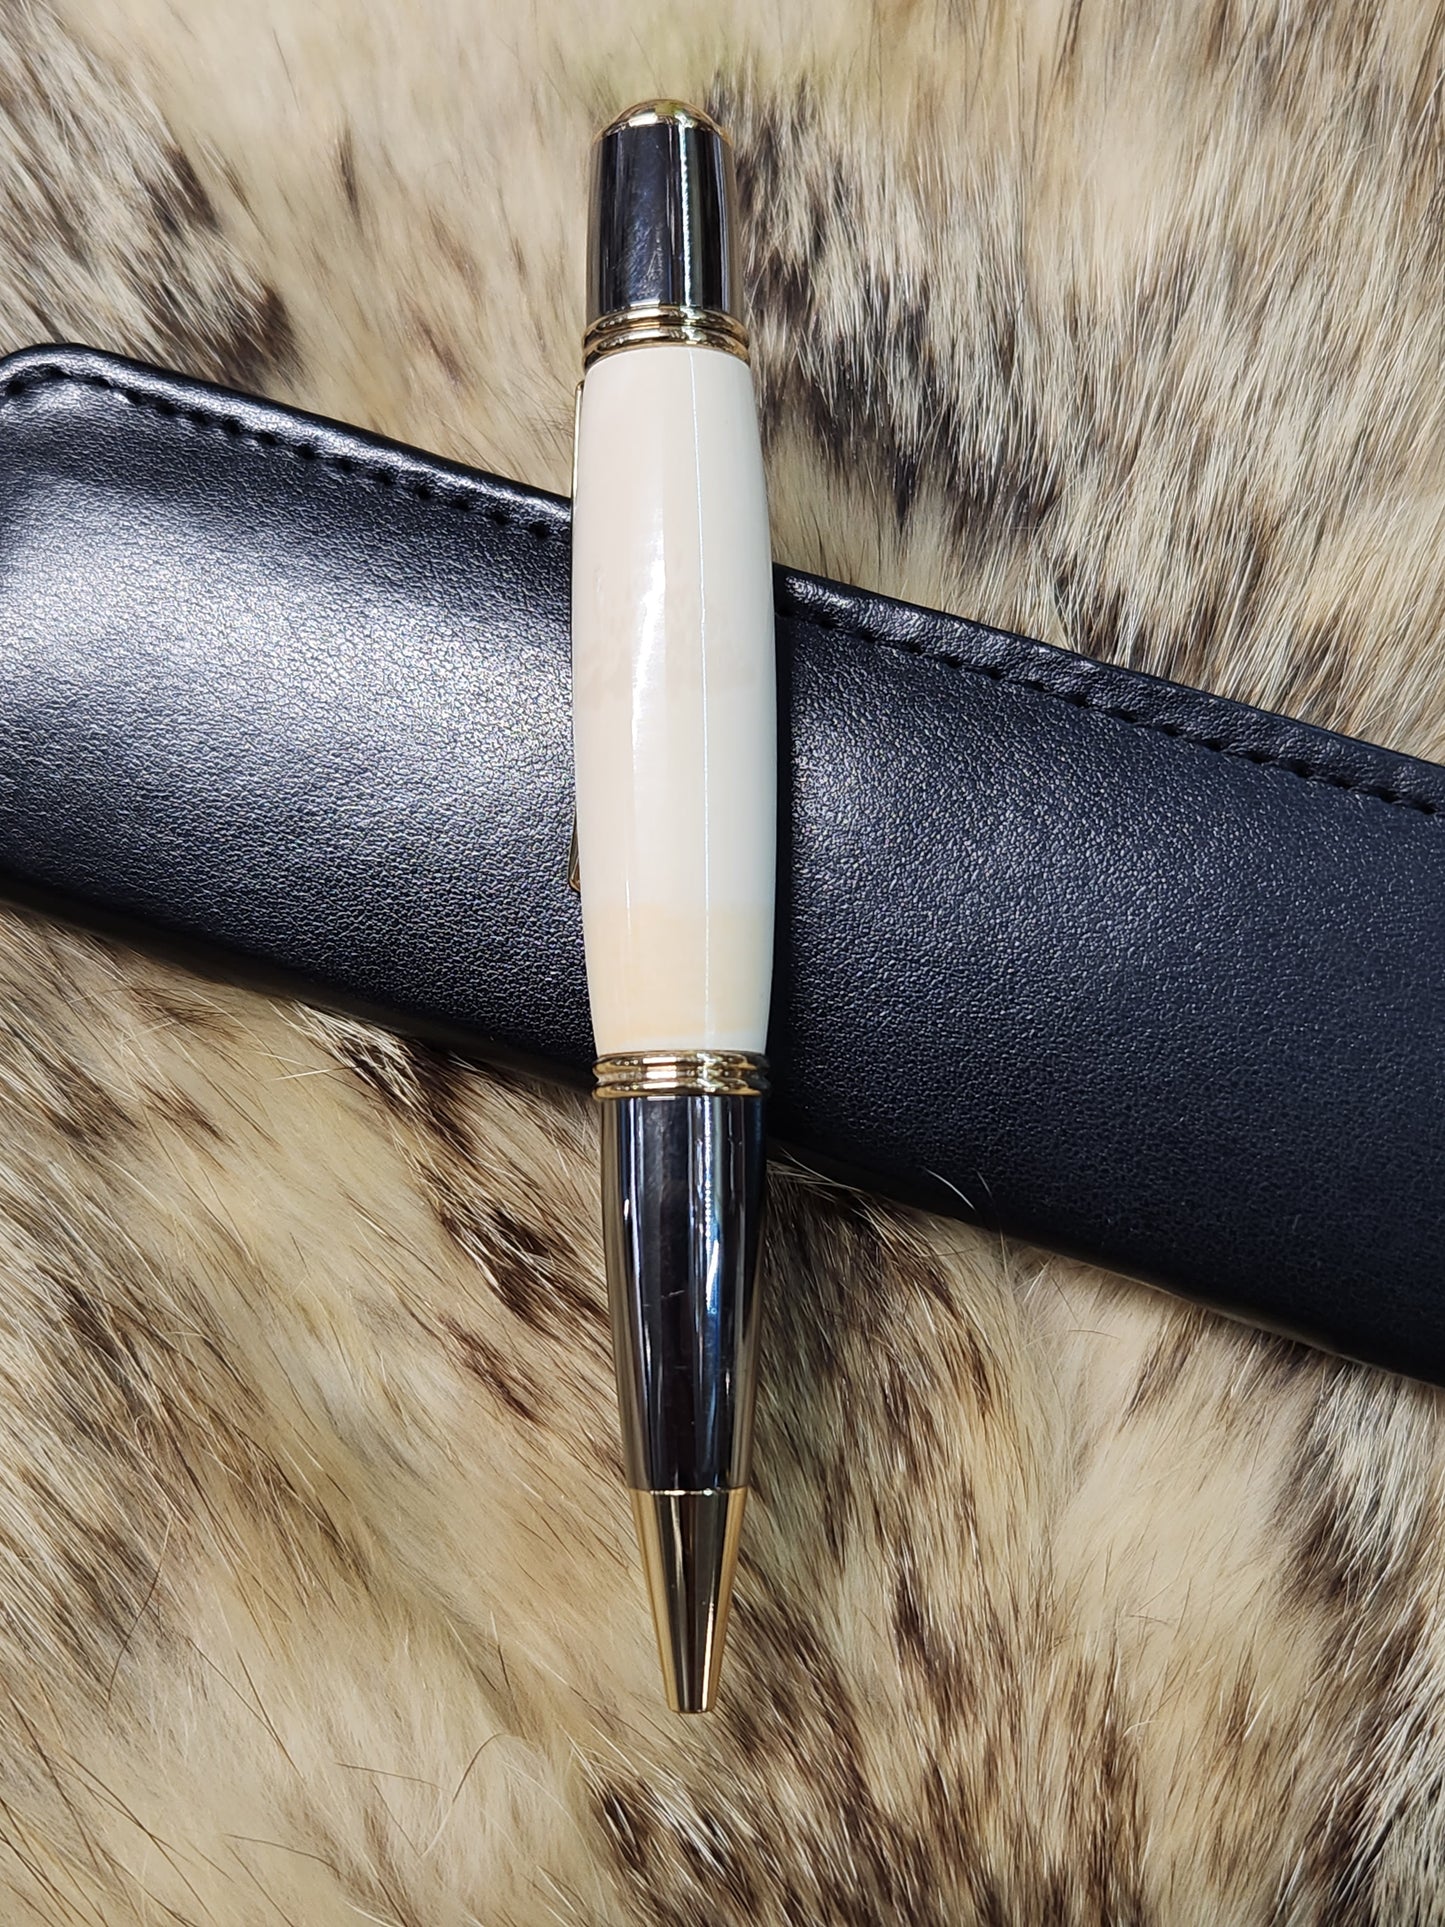 Custom Mammoth Ivory Gatsby style pen 14kt gold plated fittings